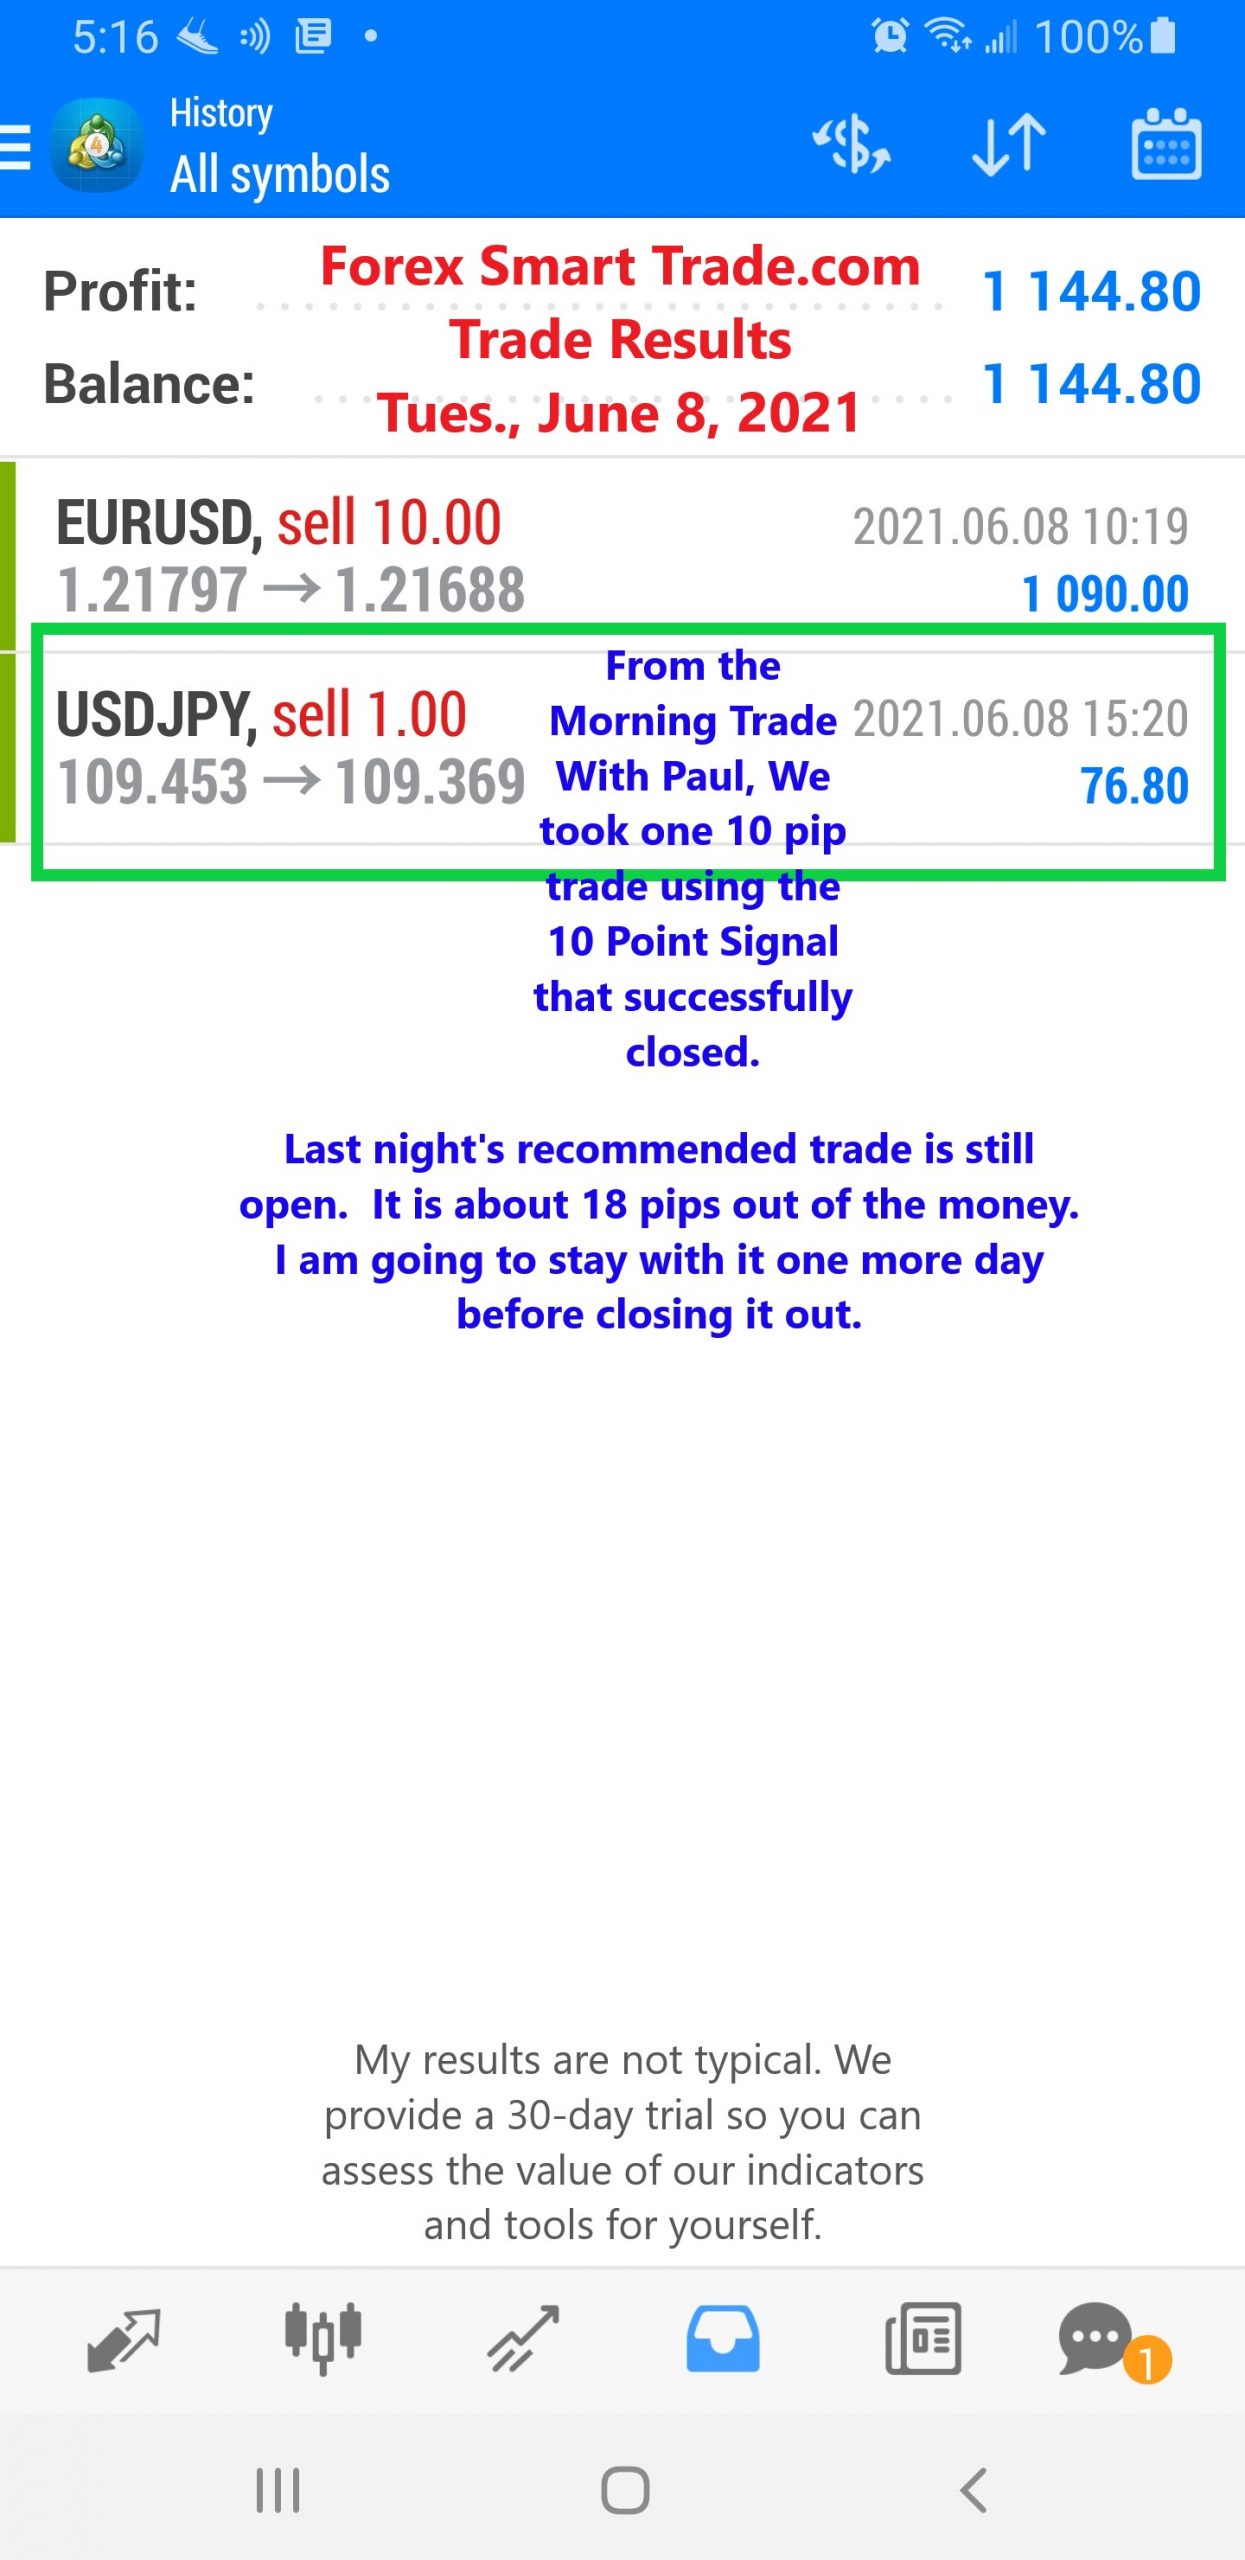 Trade Results Tuesday, June 8, 2021 - Forex Smart Trade